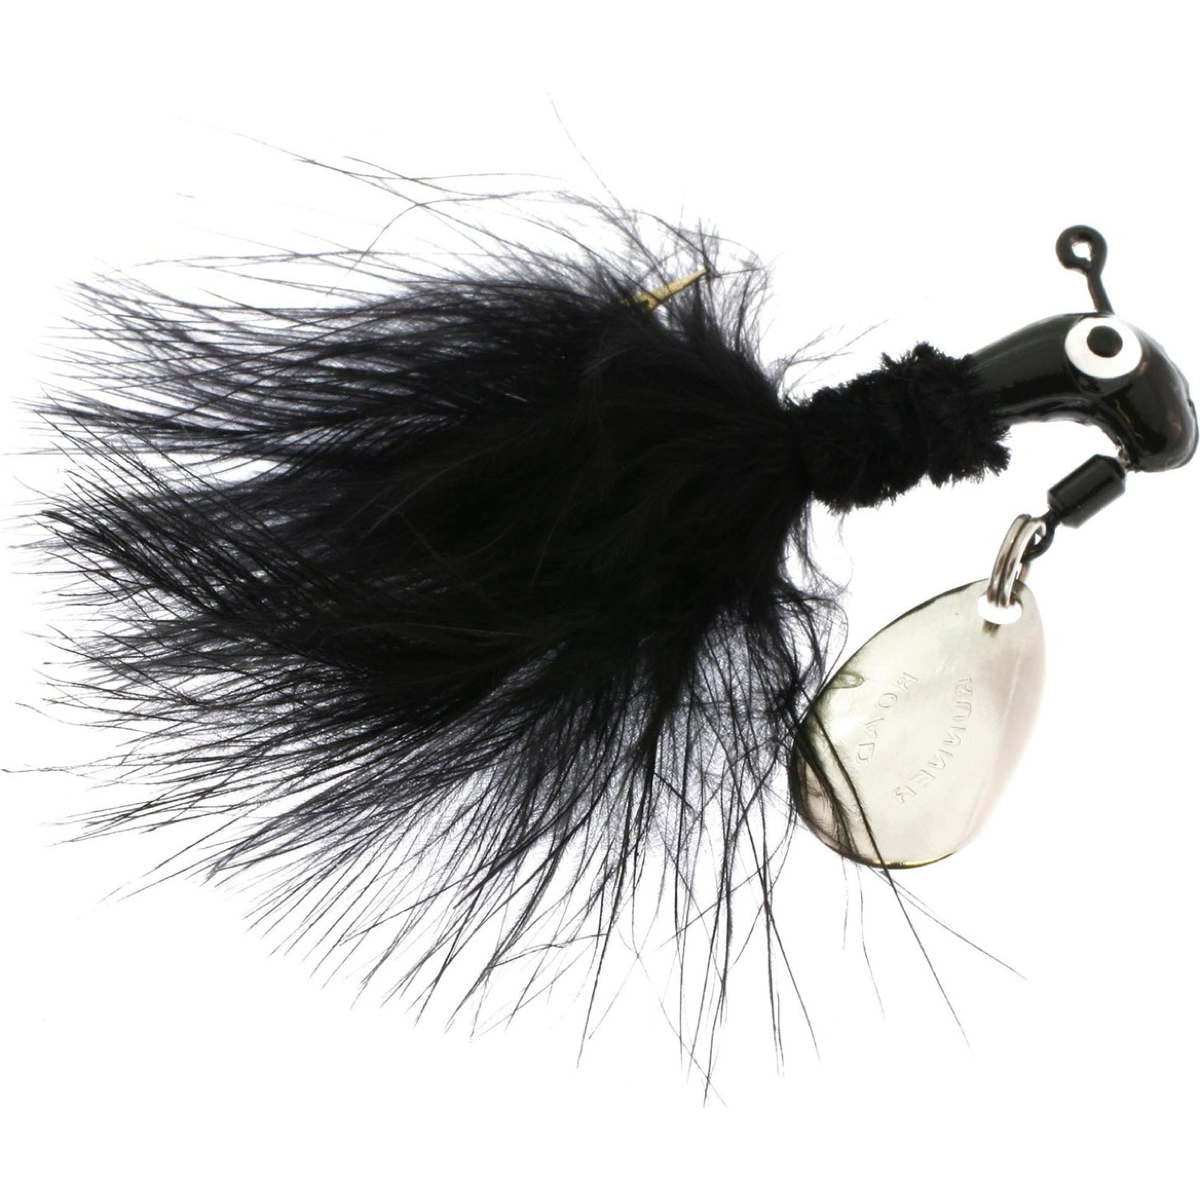 Photo of Blakemore Road Runner Marabou for sale at United Tackle Shops.